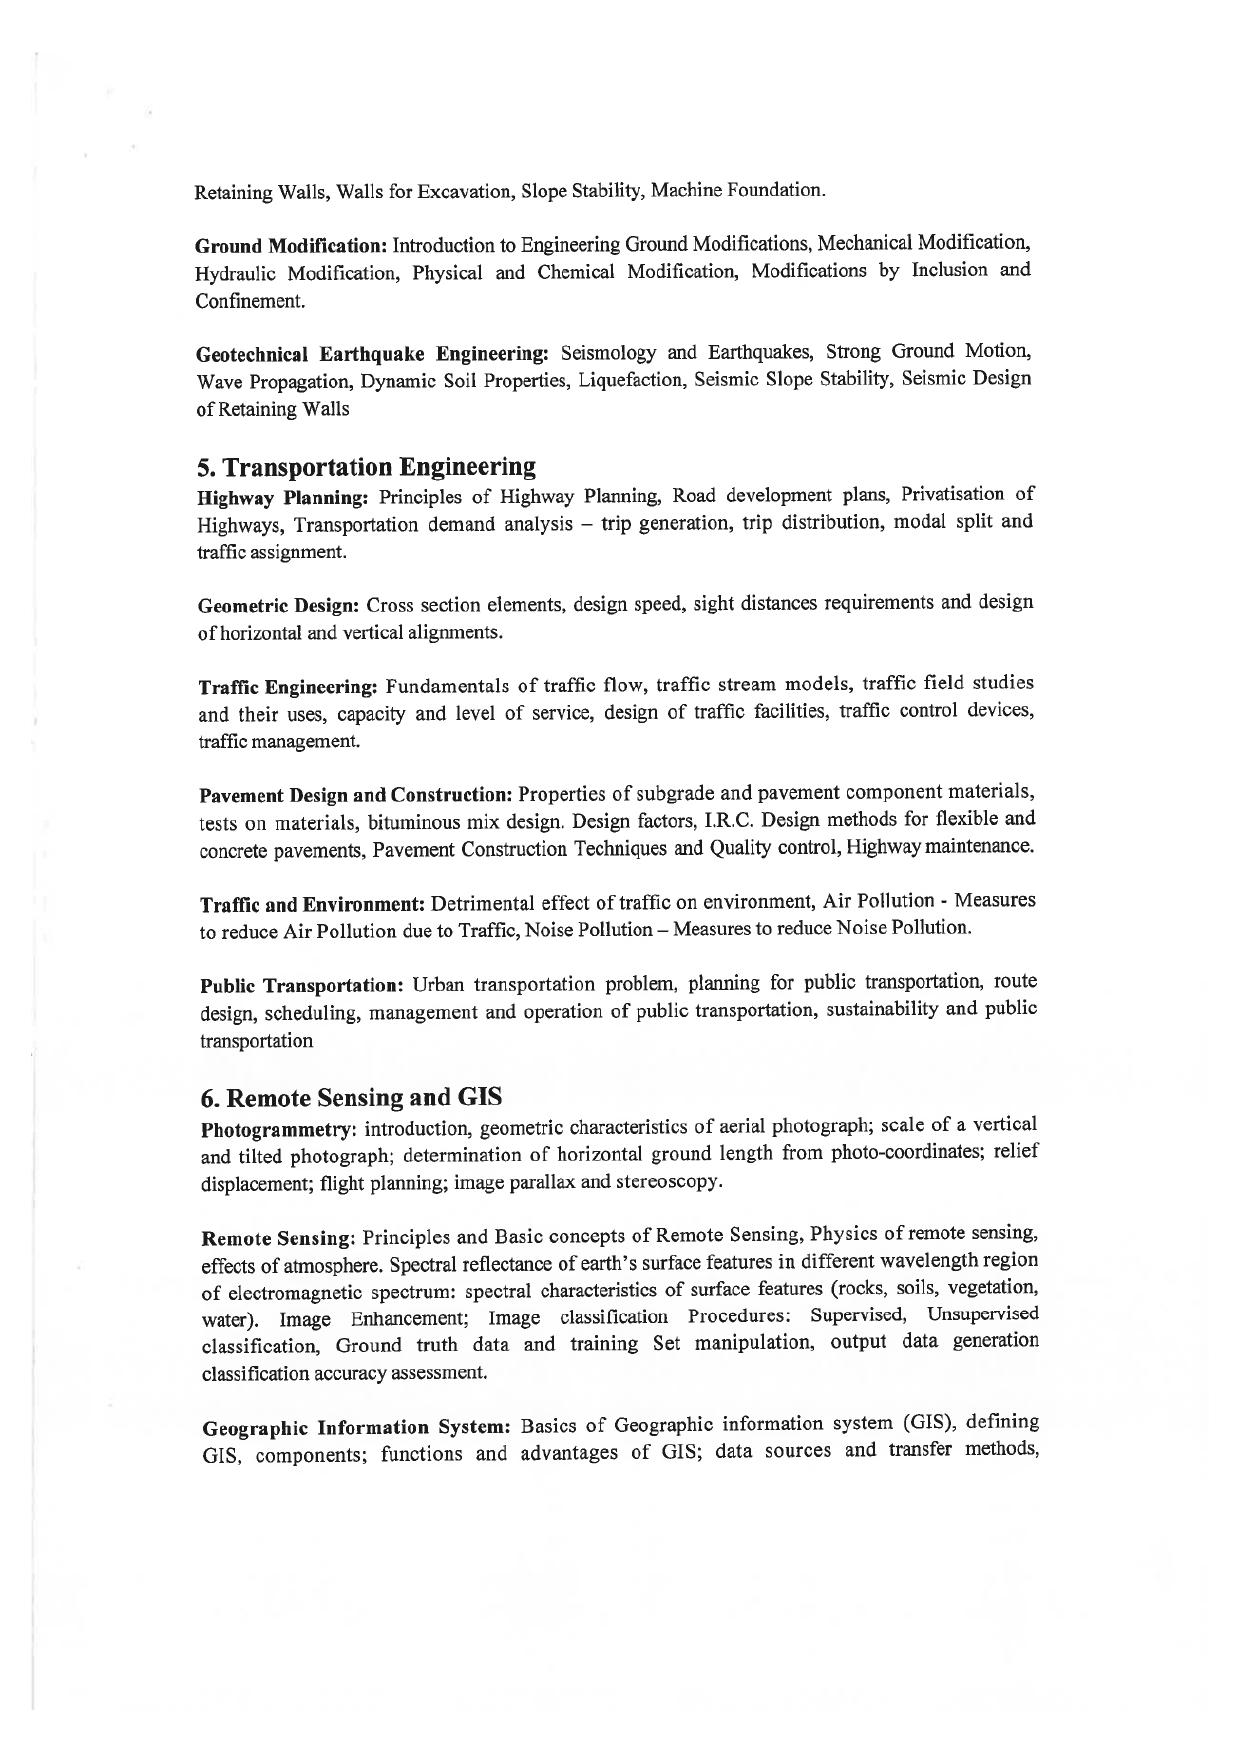 JMI Entrance Exam FACULTY OF ENGINEERING & TECHNOLOGY Syllabus - Page 9